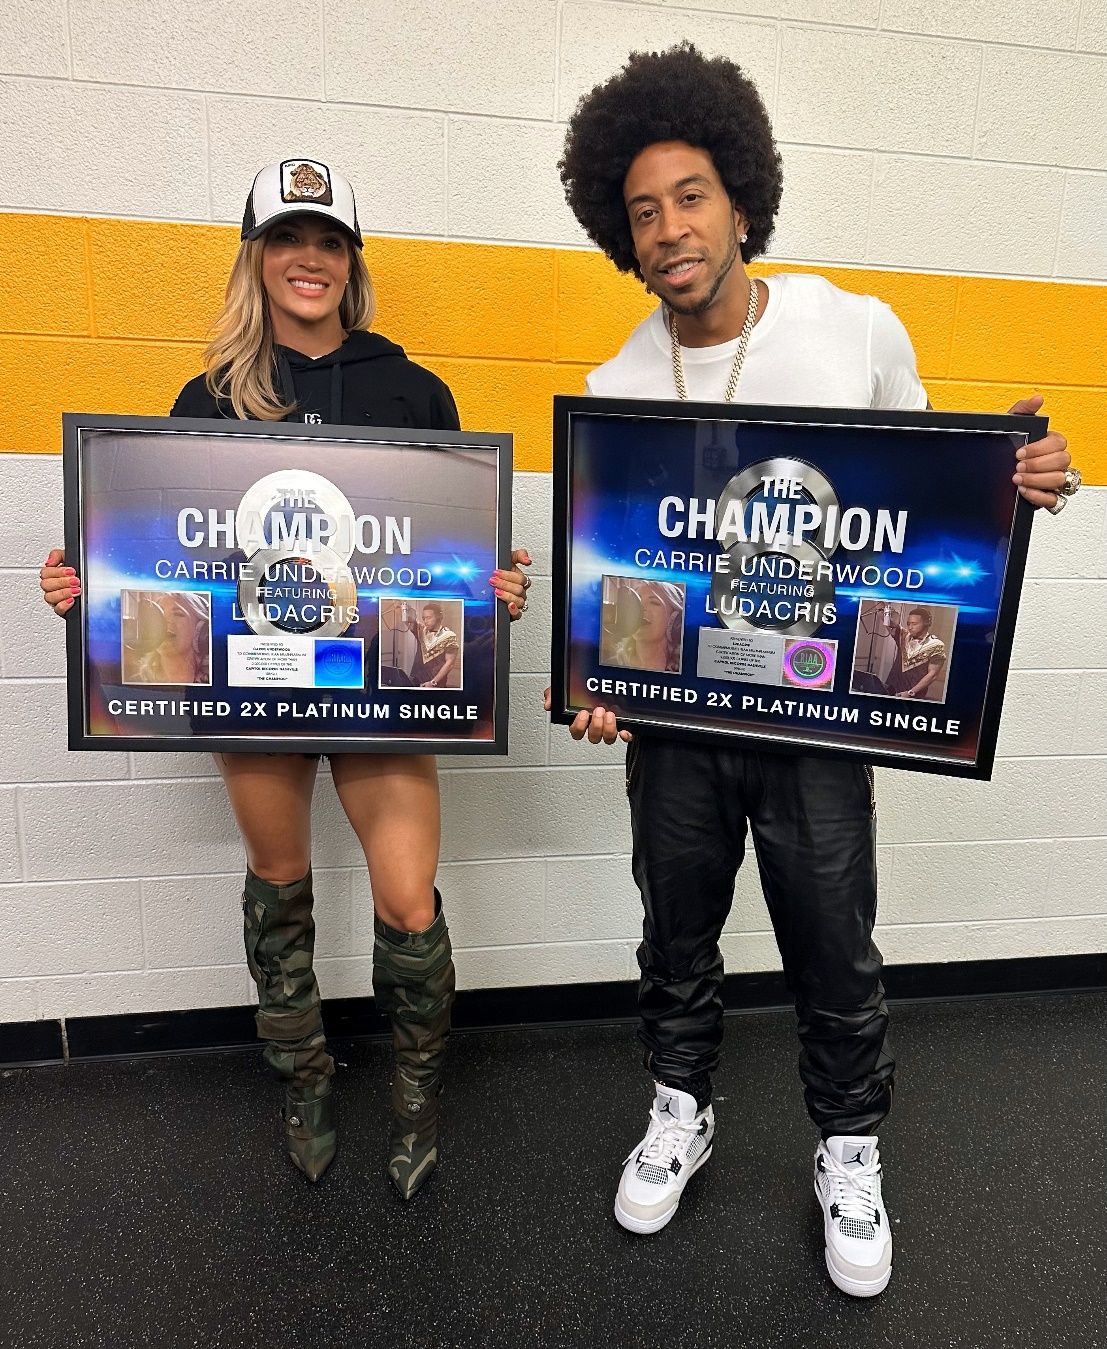 Carrie Underwood and Ludacris Celebrate RIAA Double Platinum for “The Champion”